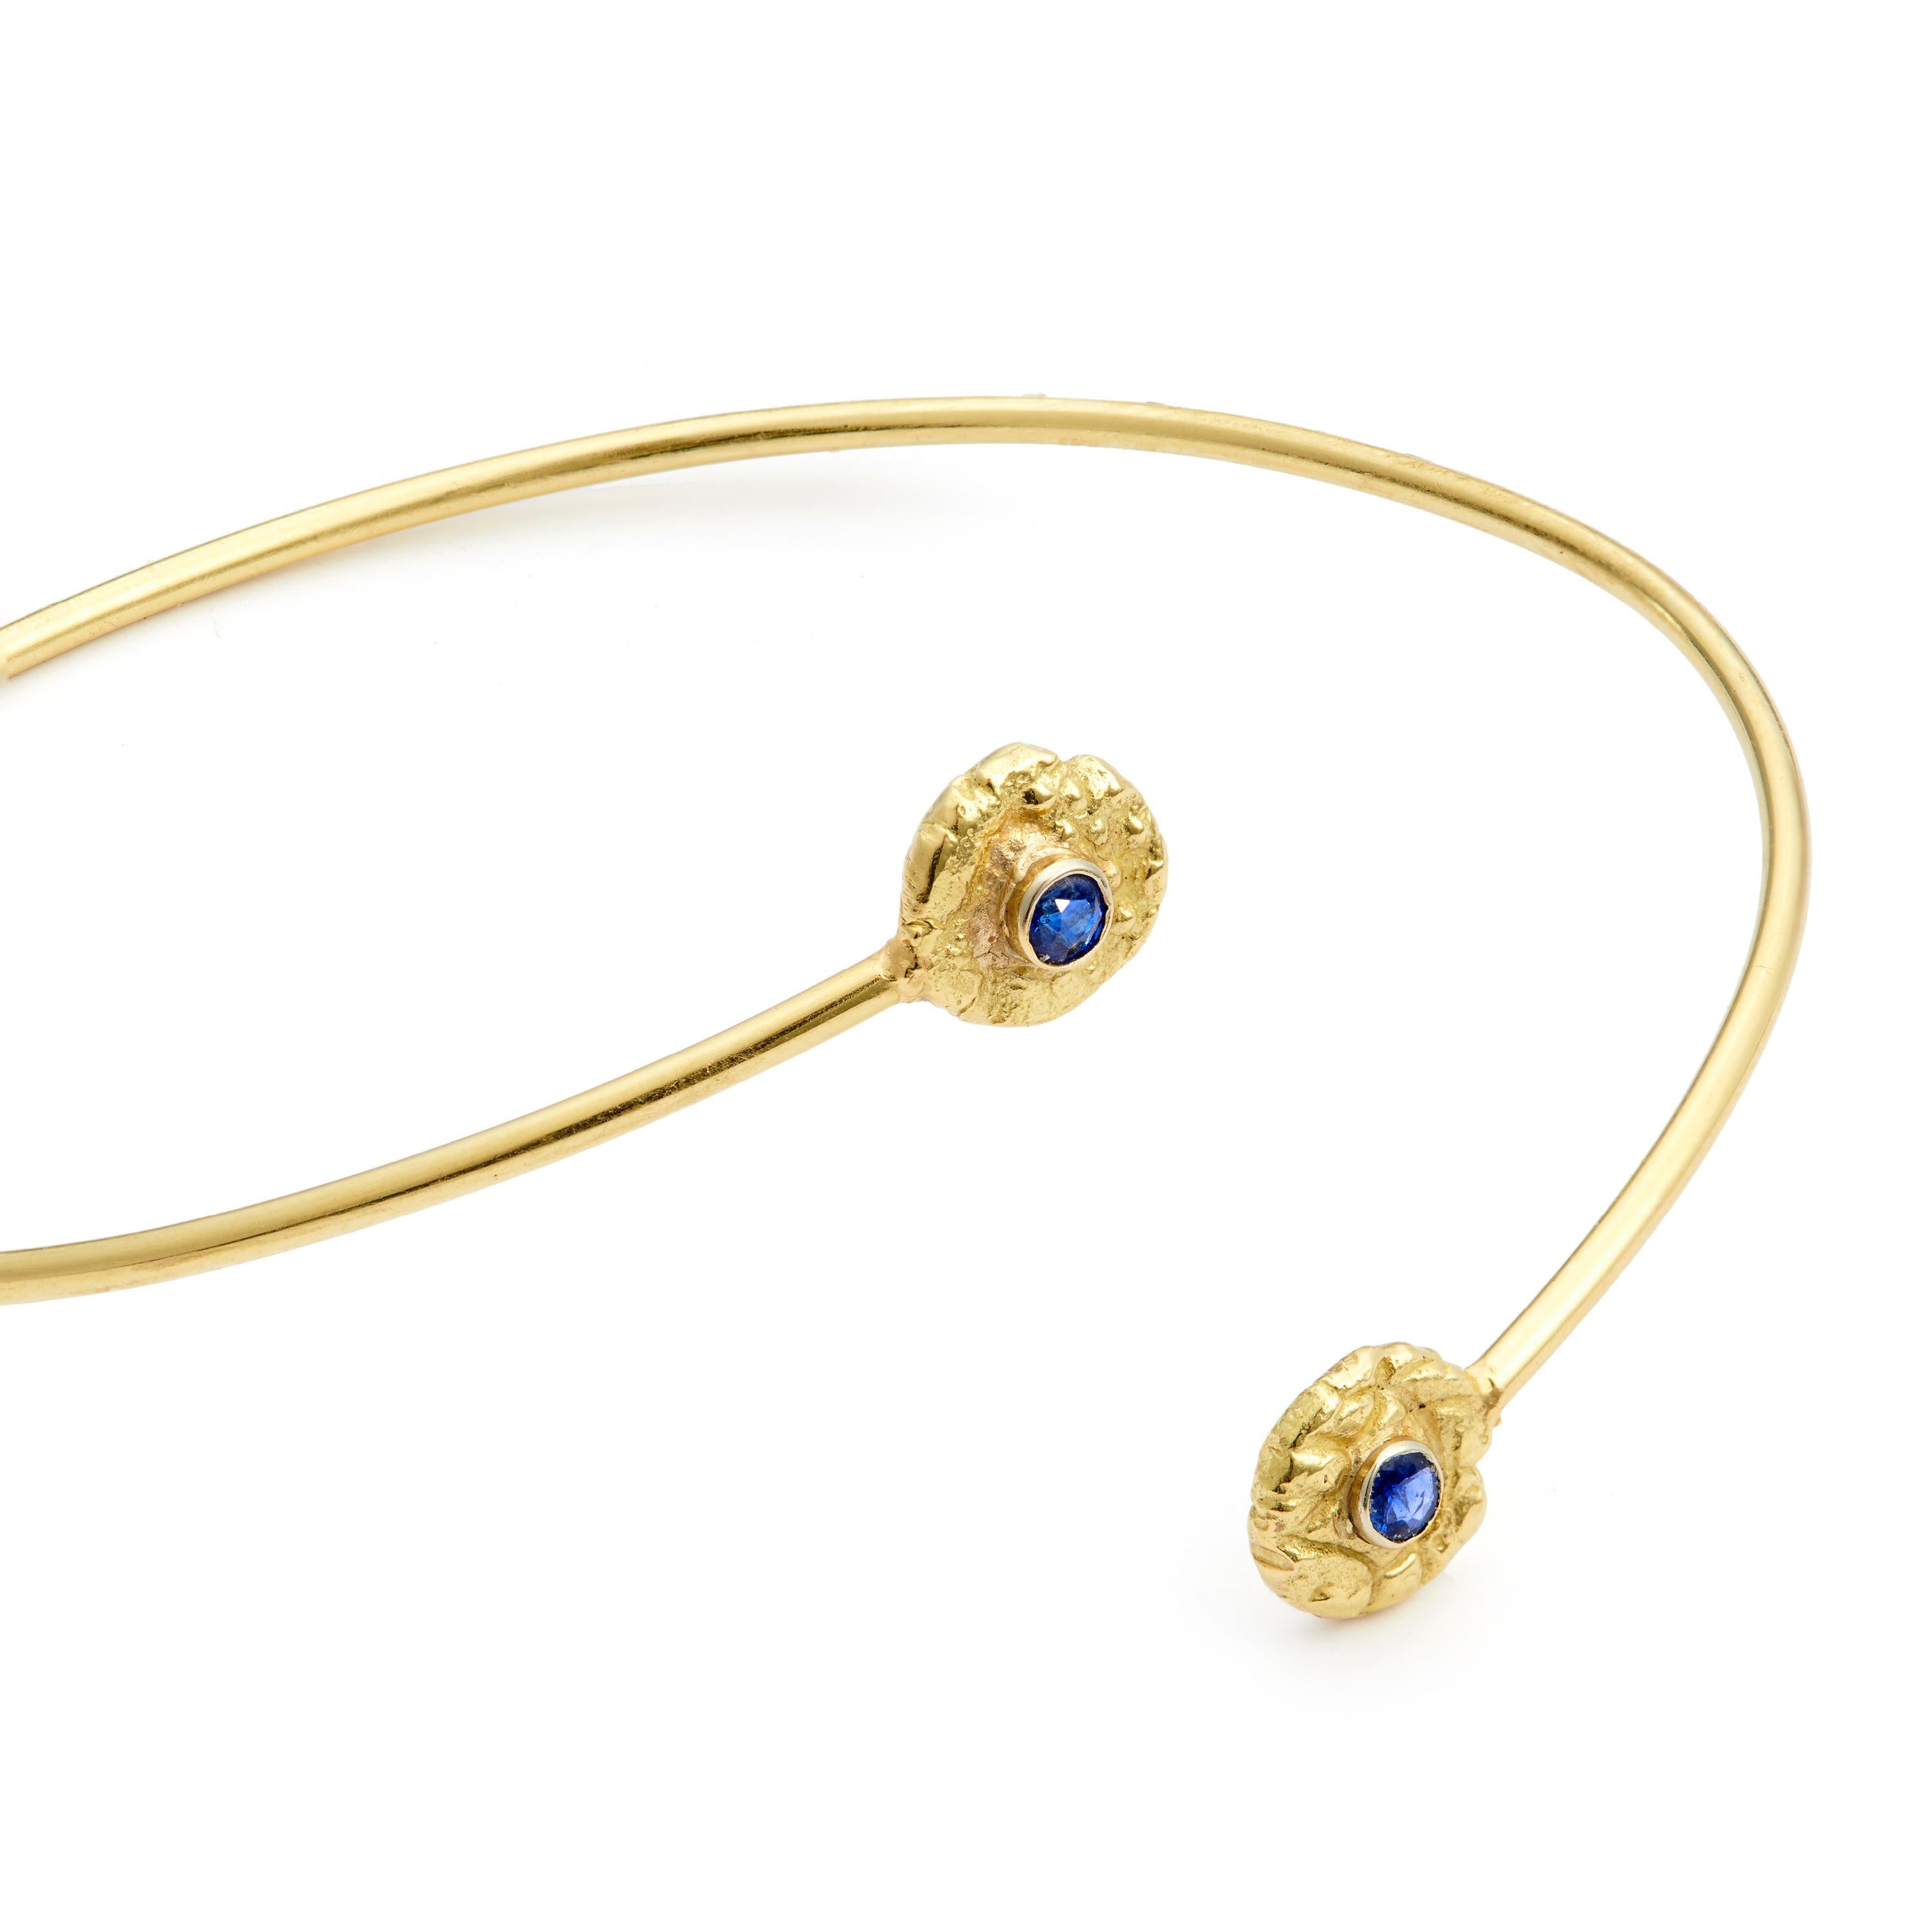 Contemporary Susan Lister Locke “Seaquin” Bypass Bangle Bracelet & Blue Sapphires in 18K Gold For Sale